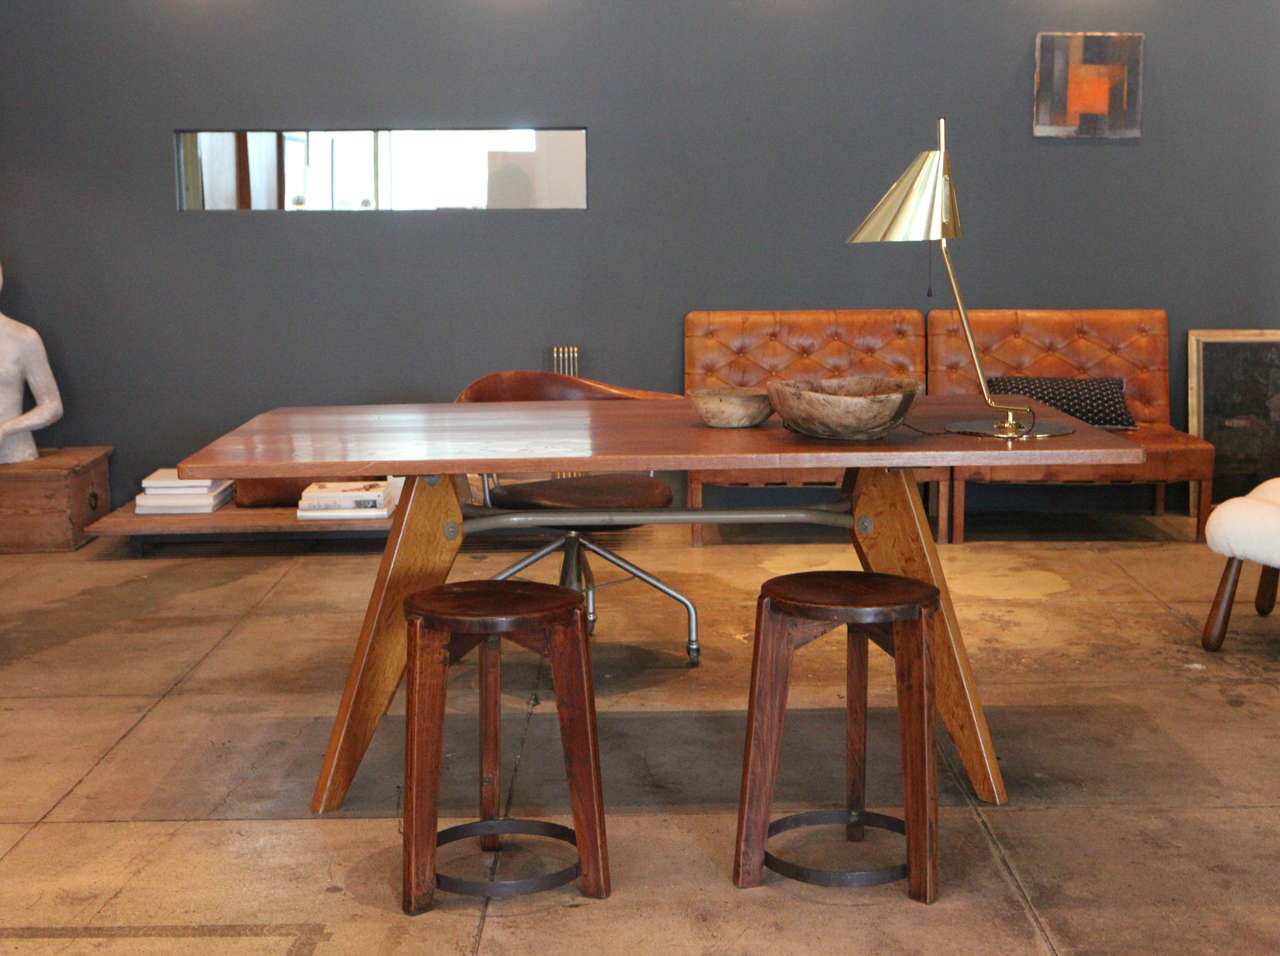 French Jean Prouve Demountable Dining Table, Jean Prouve Ateliers, 1950